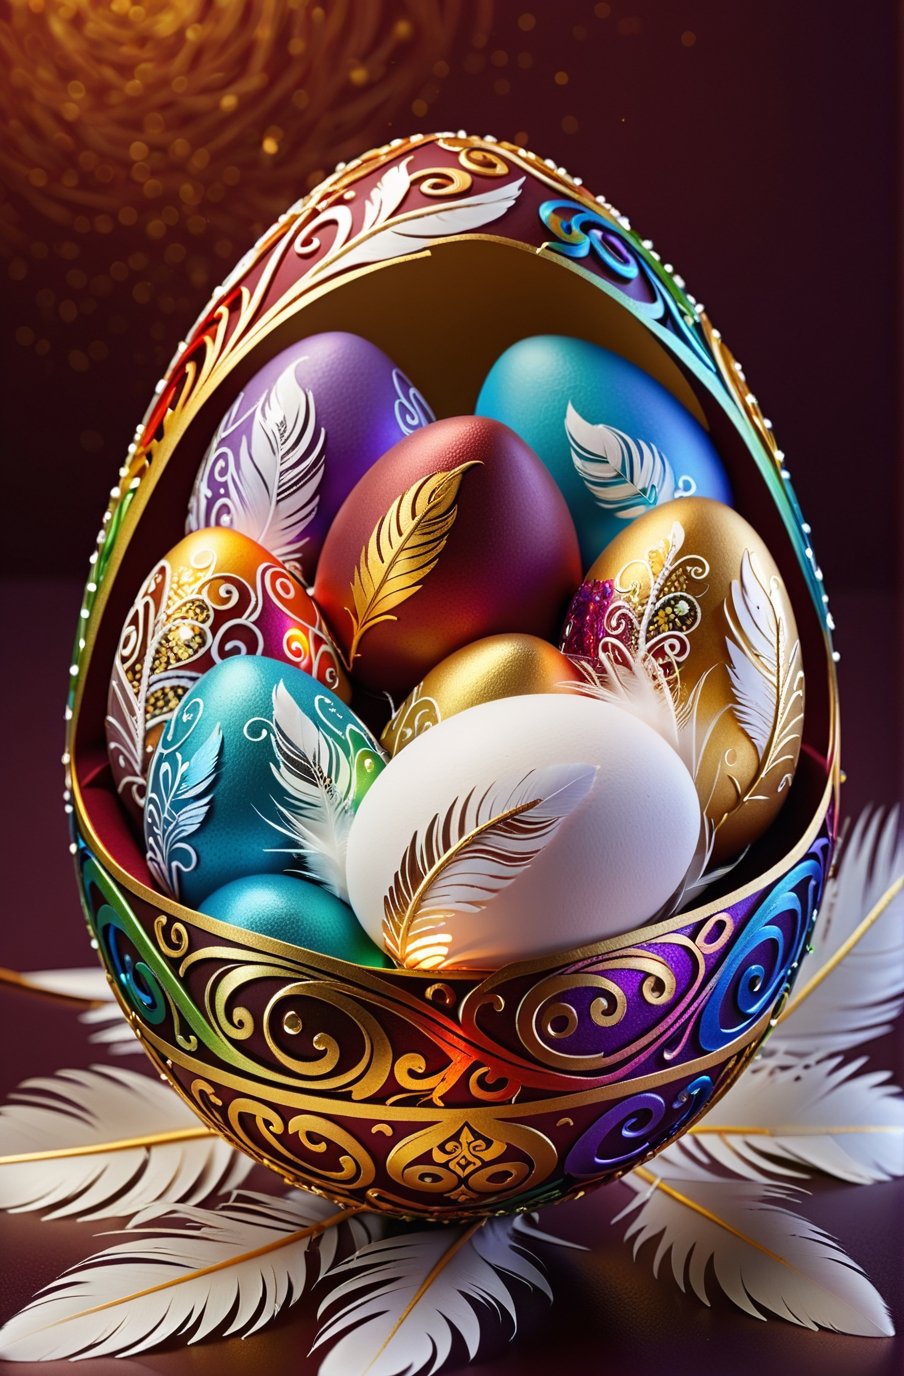 Easter eggs designed with arabesques and swirls using a harmonious mix of rainbow colors.
A pile of tiny golden twigs and many white feathers cover the egg from the bottom as if protecting it.
The egg shines even brighter due to the intense lighting that illuminates the egg on a dark red and golden background.

Ultra-clear, Ultra-detailed, ultra-realistic, ultra-close up